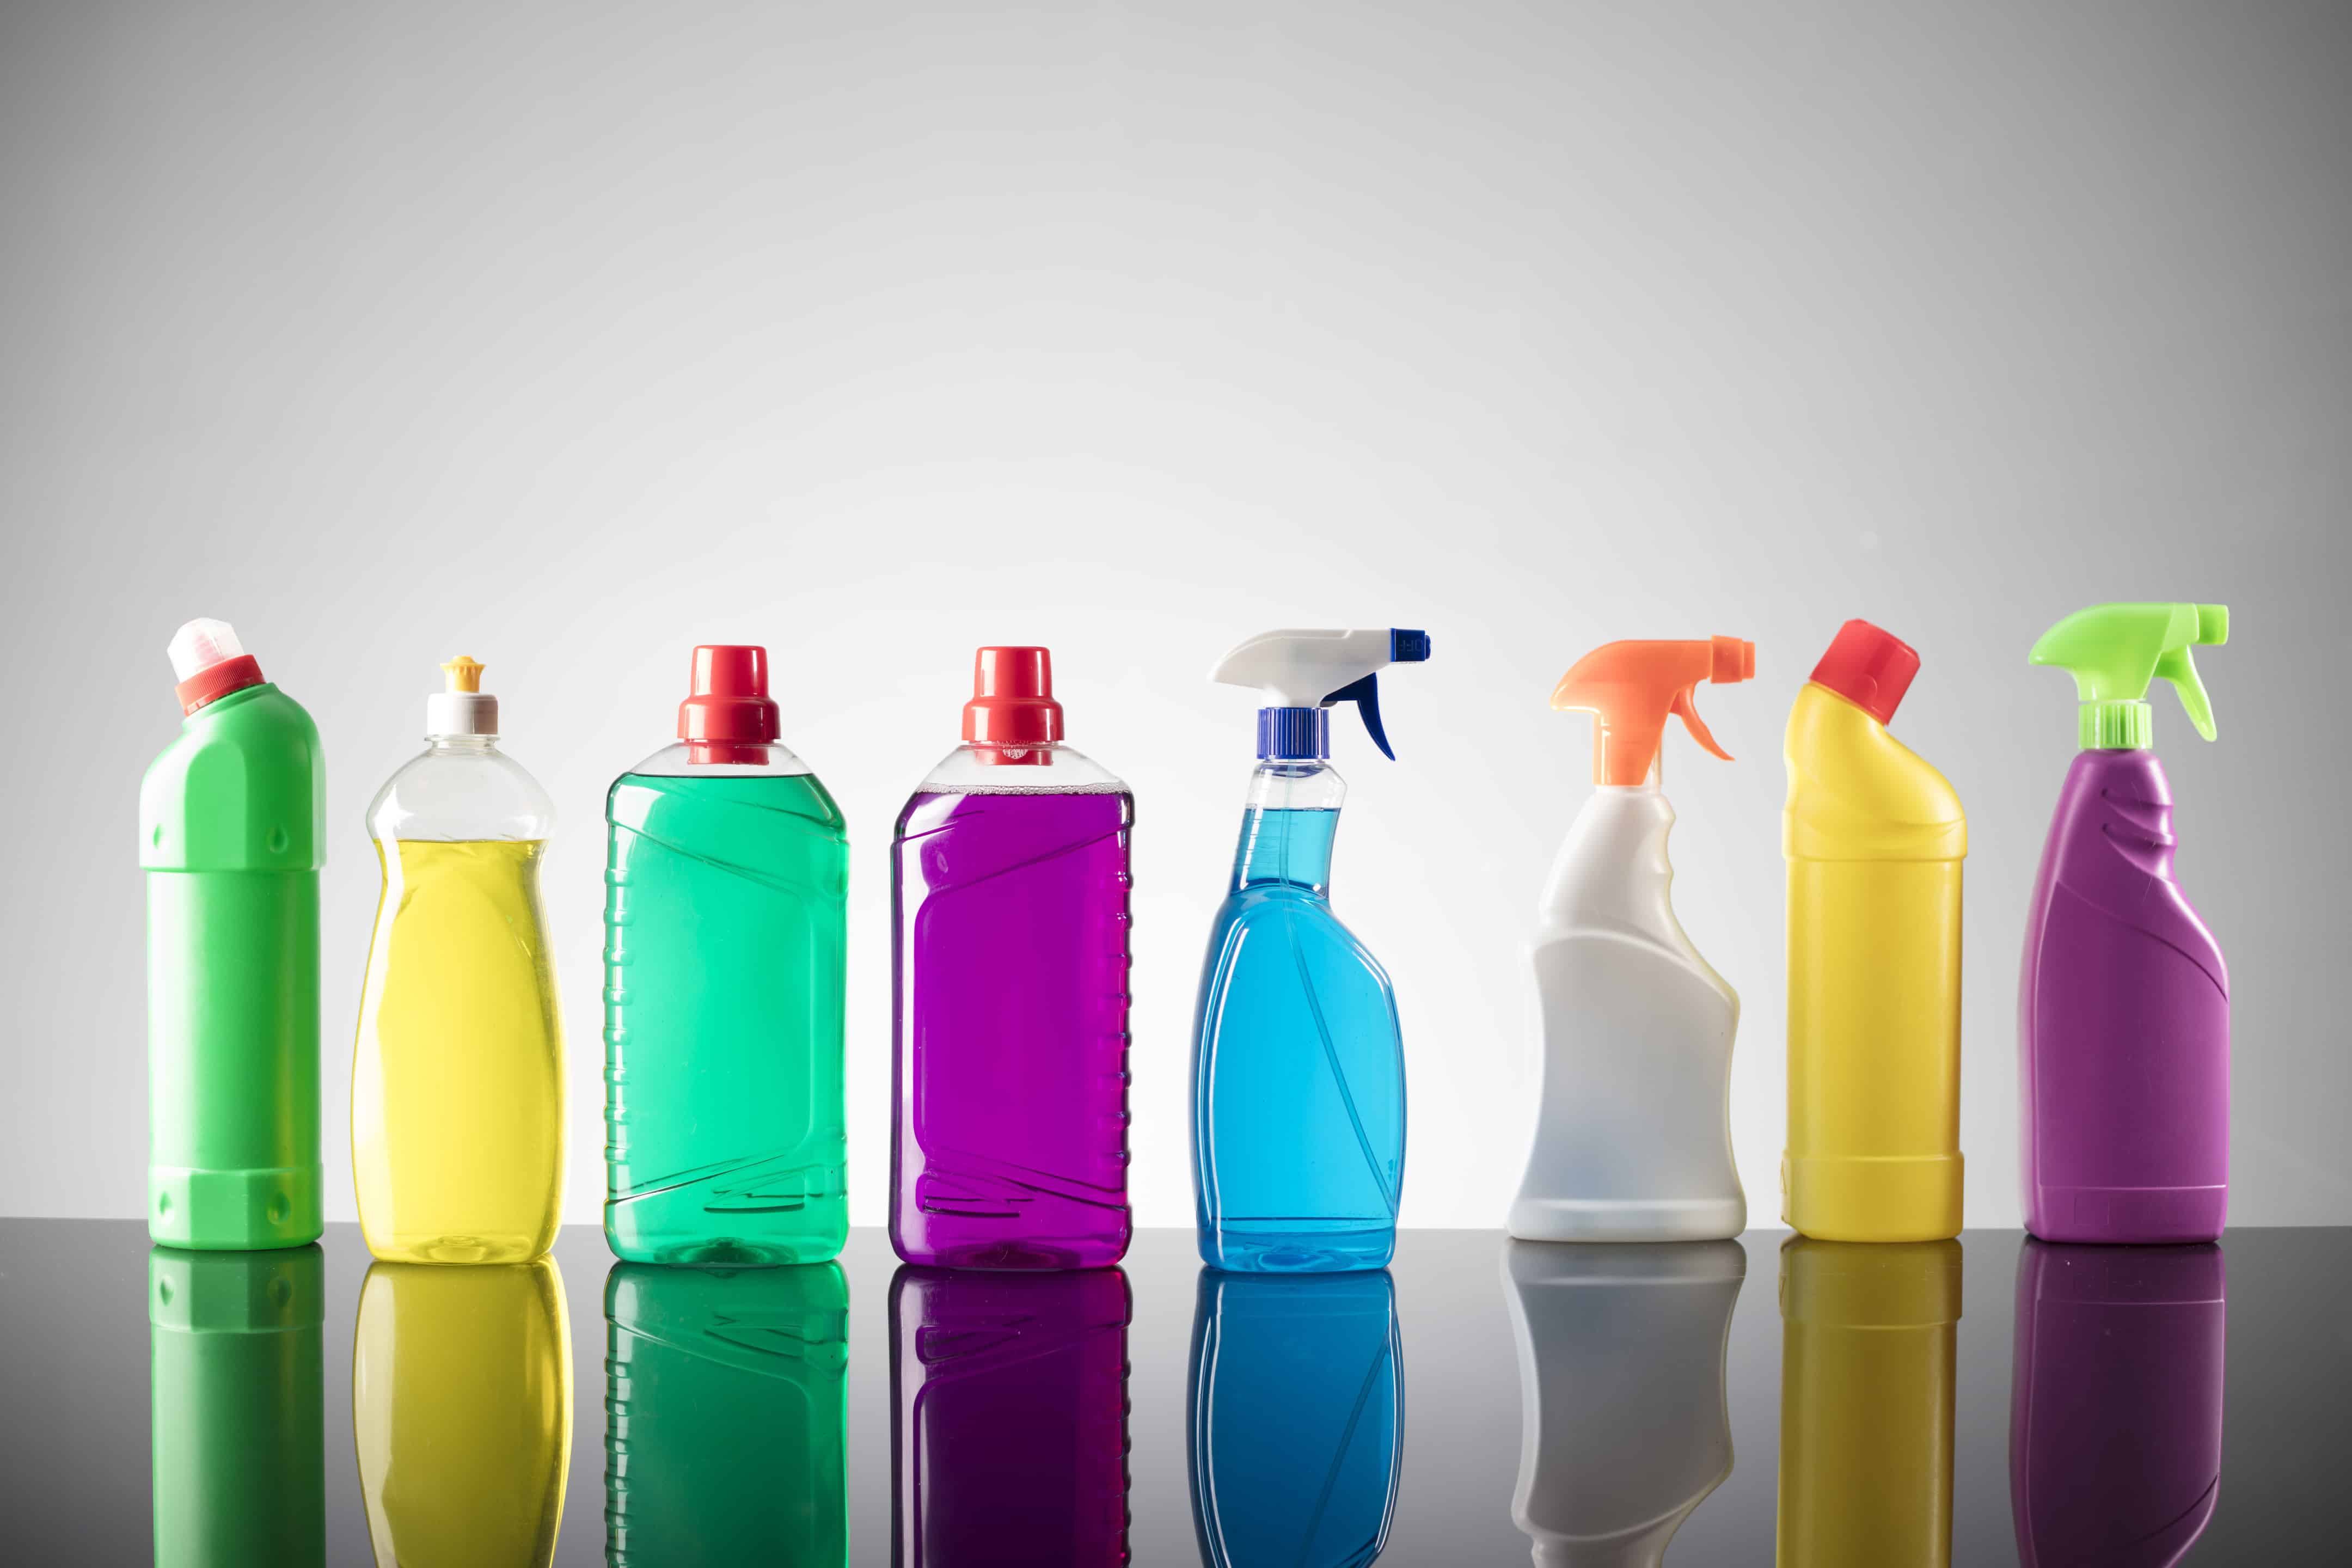 Moving Company Item Restrictions - cleaning products - Mayflower